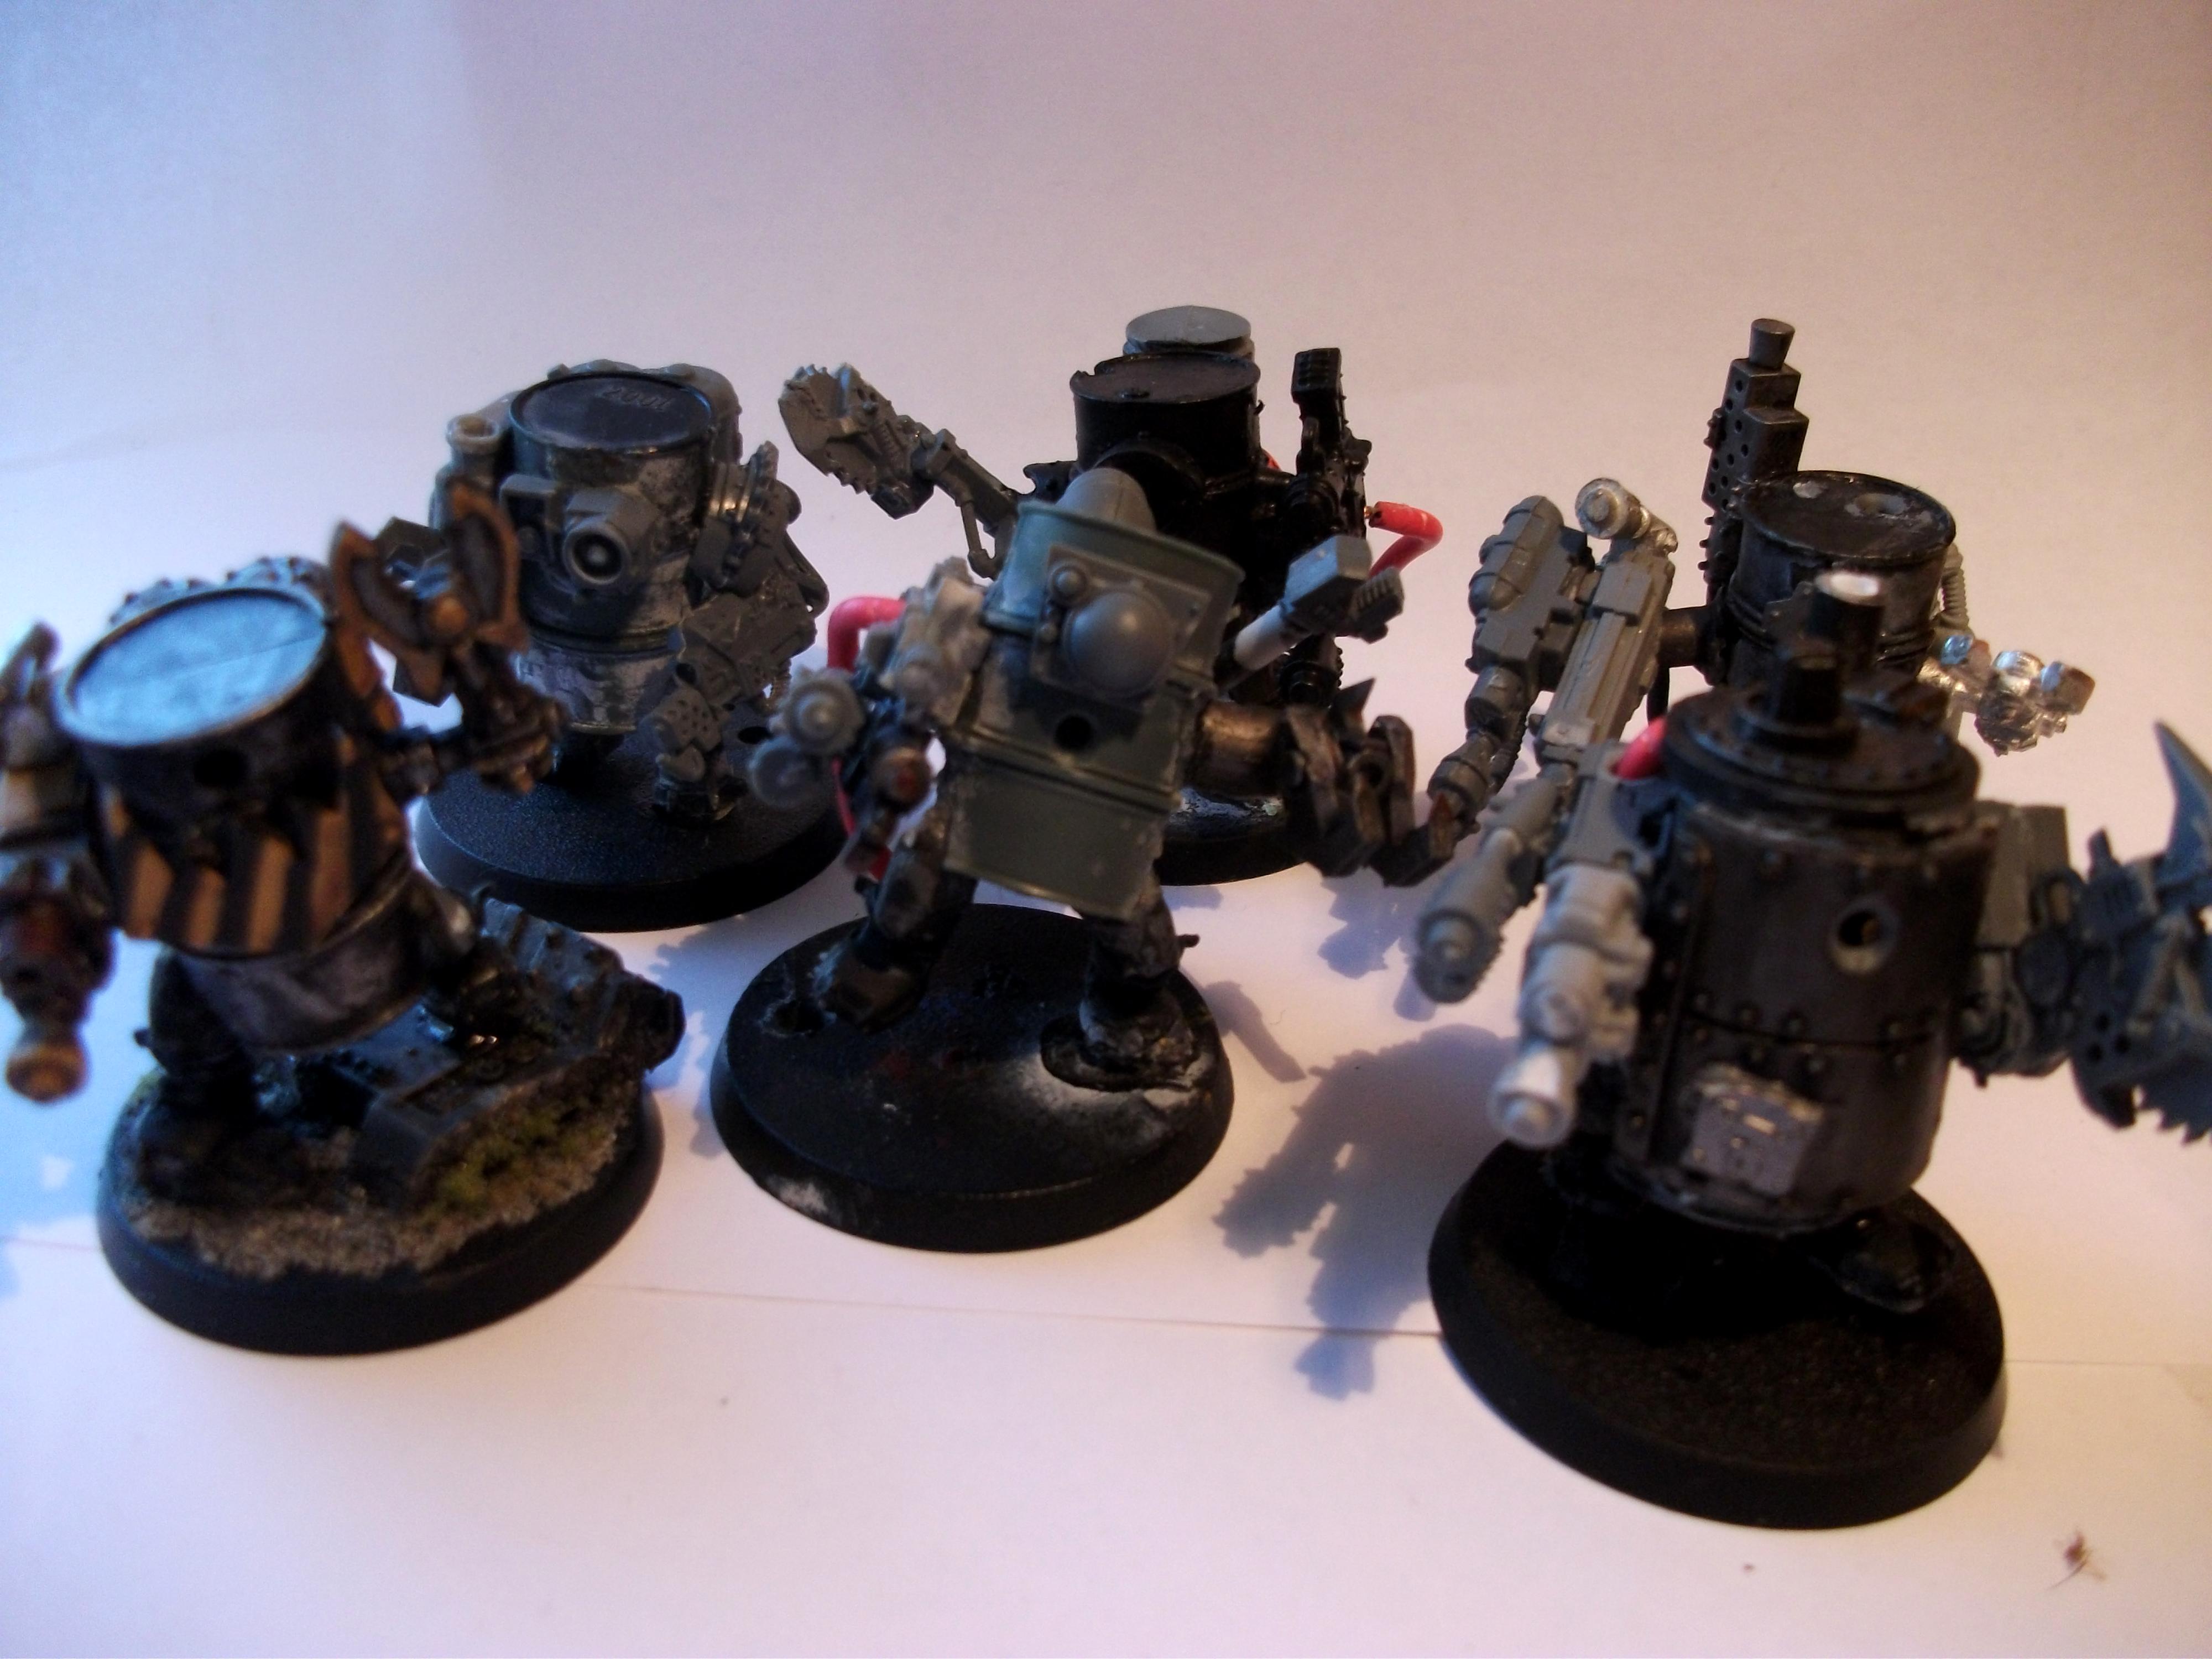 Customized, Grot Boxes, Killa Kan, Orks, Painted, Walkers, Warhammer 40,000